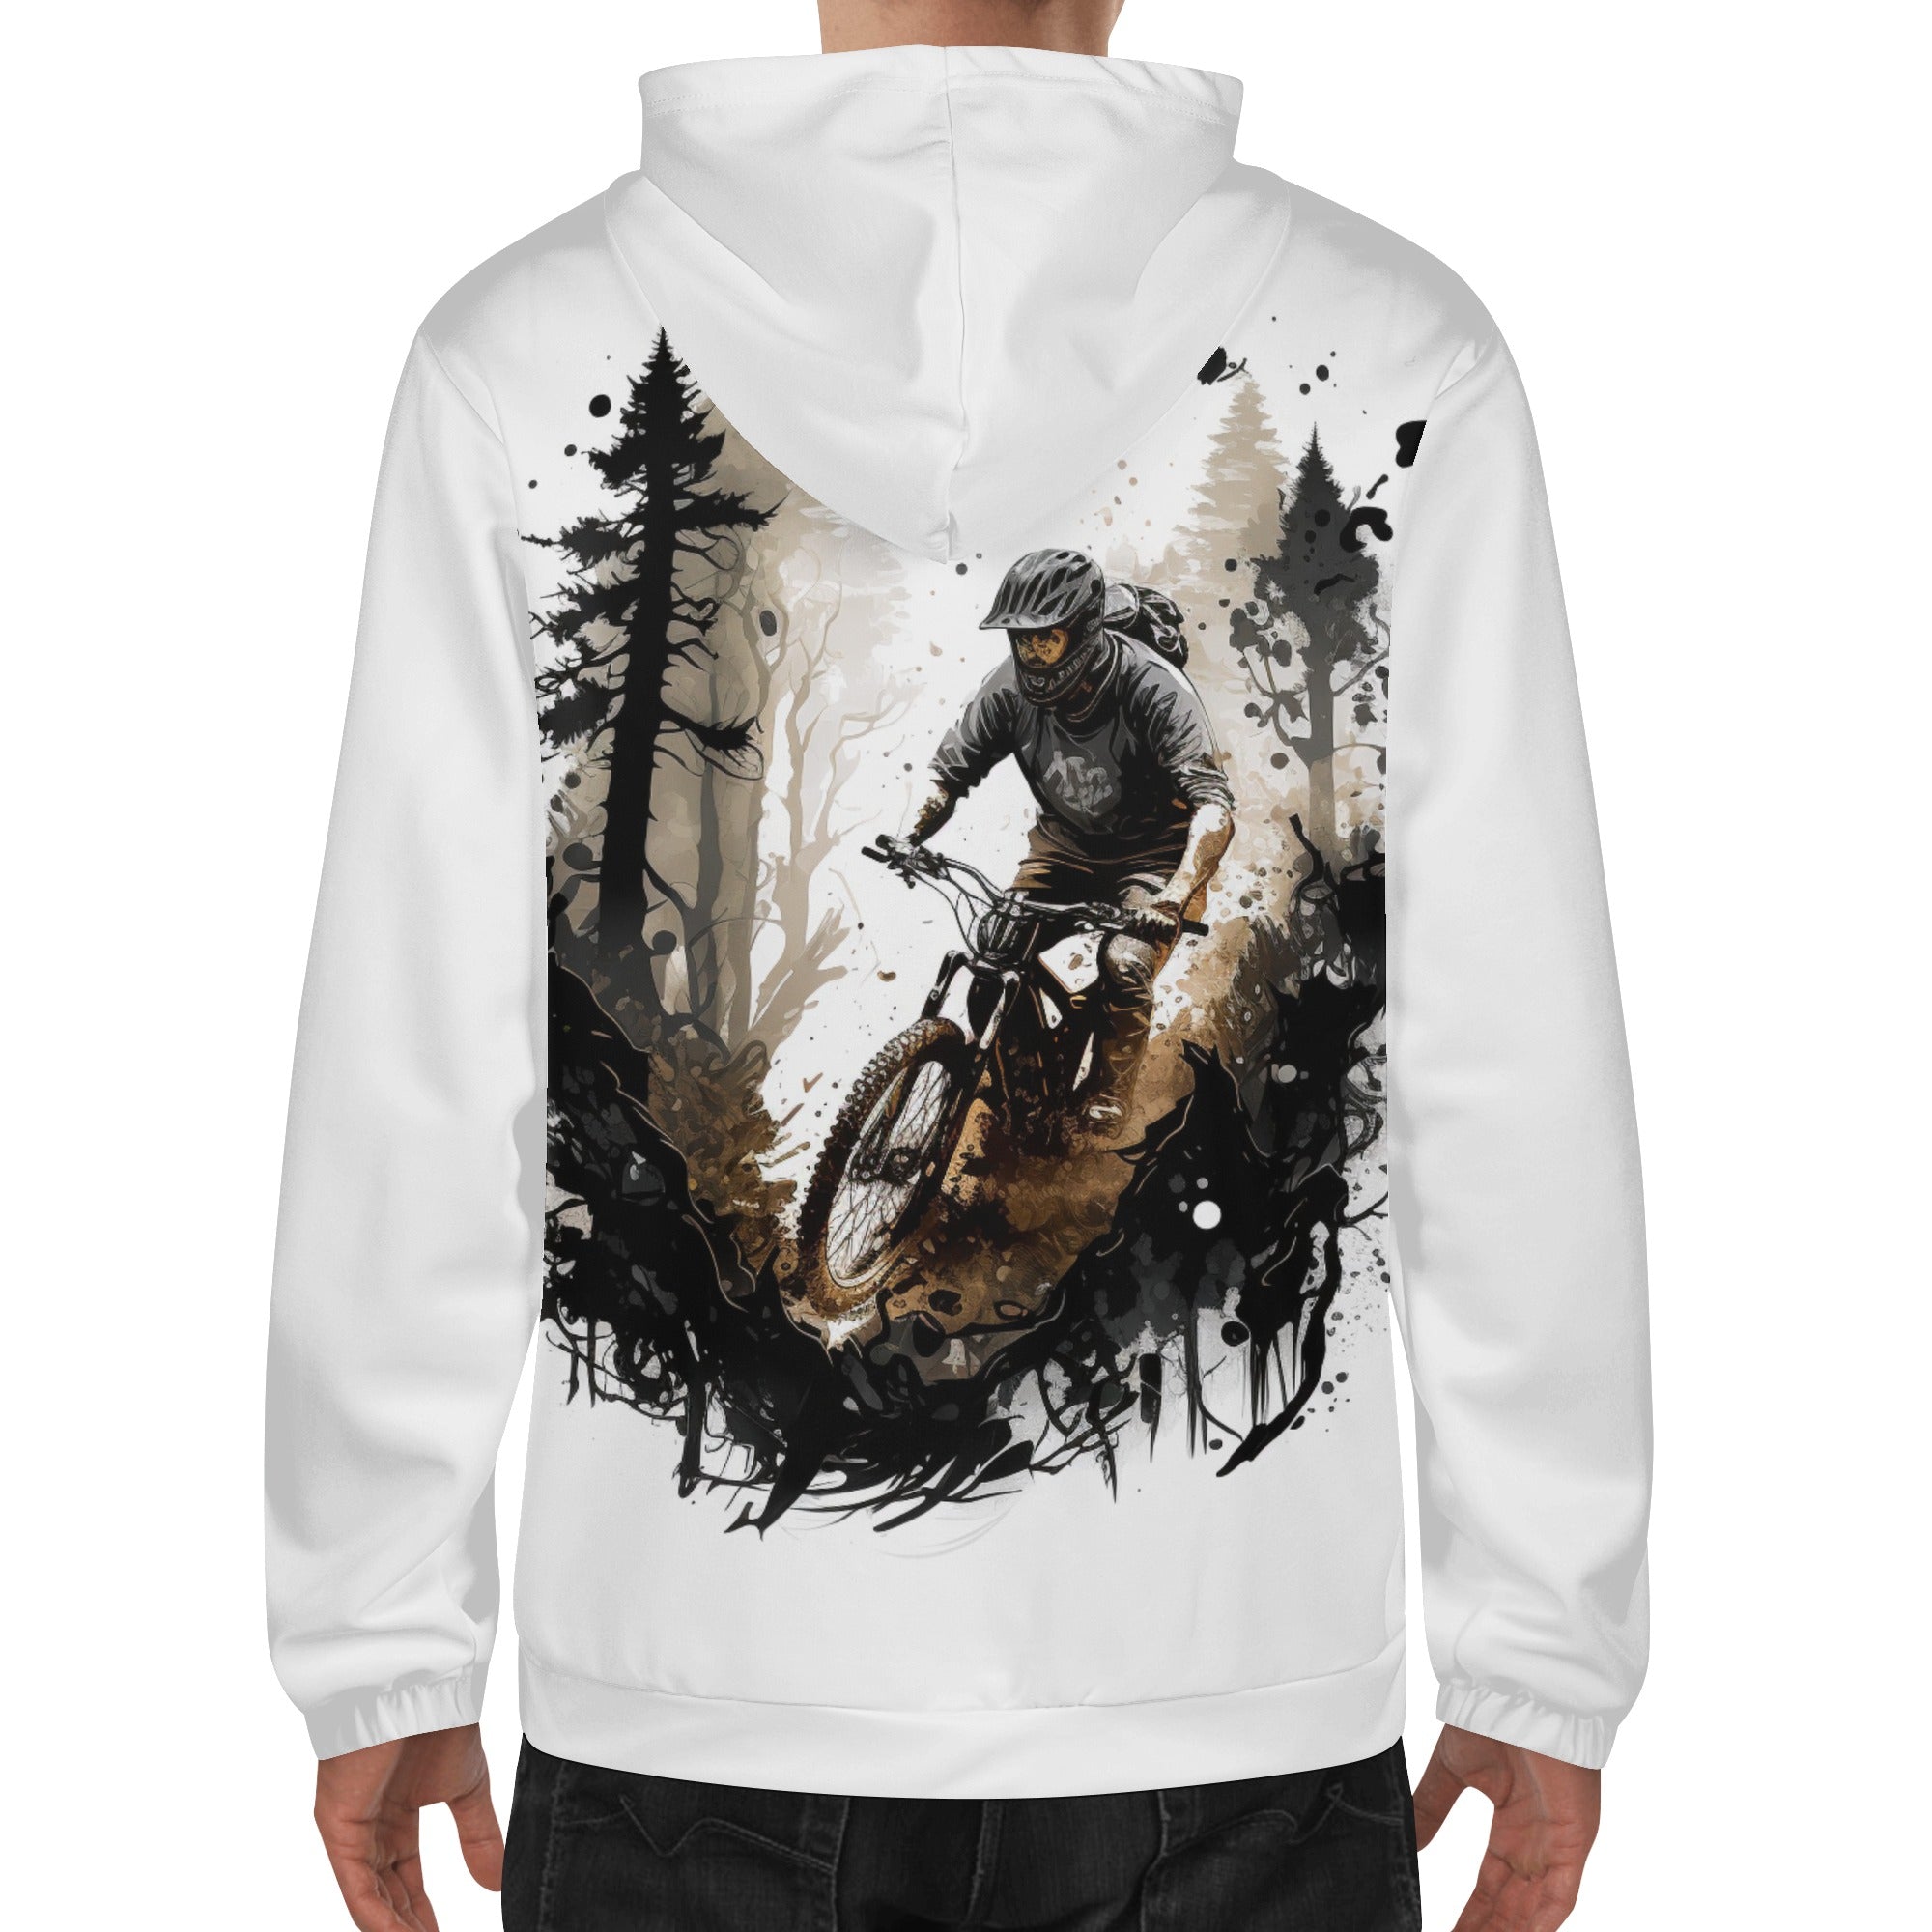 HOODIE | SINGLE TRACK DREAMER RIDER IN FOREST | WHITE | FRANT AND BACK | S - 4XL - Single Track Dreamer